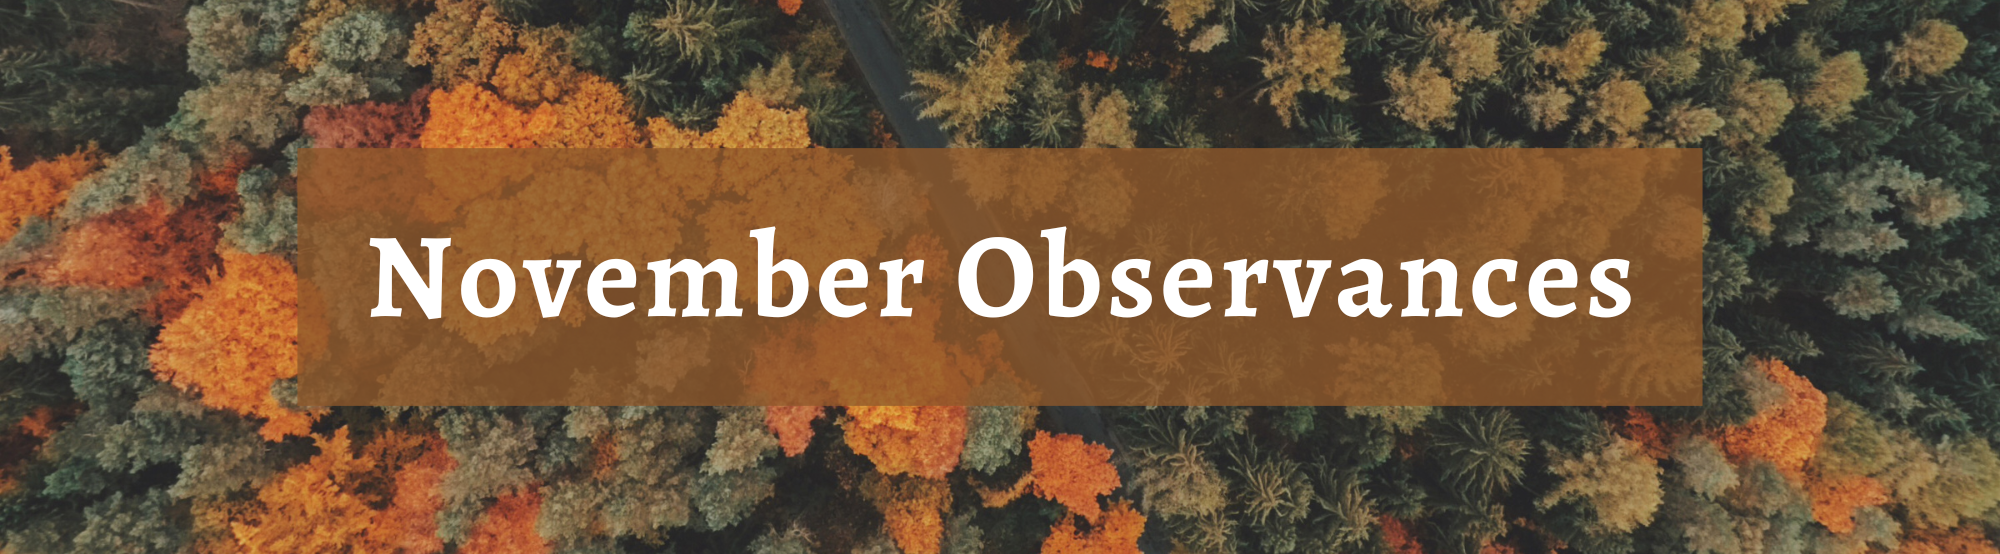 Decorative banner with the text: November Observances